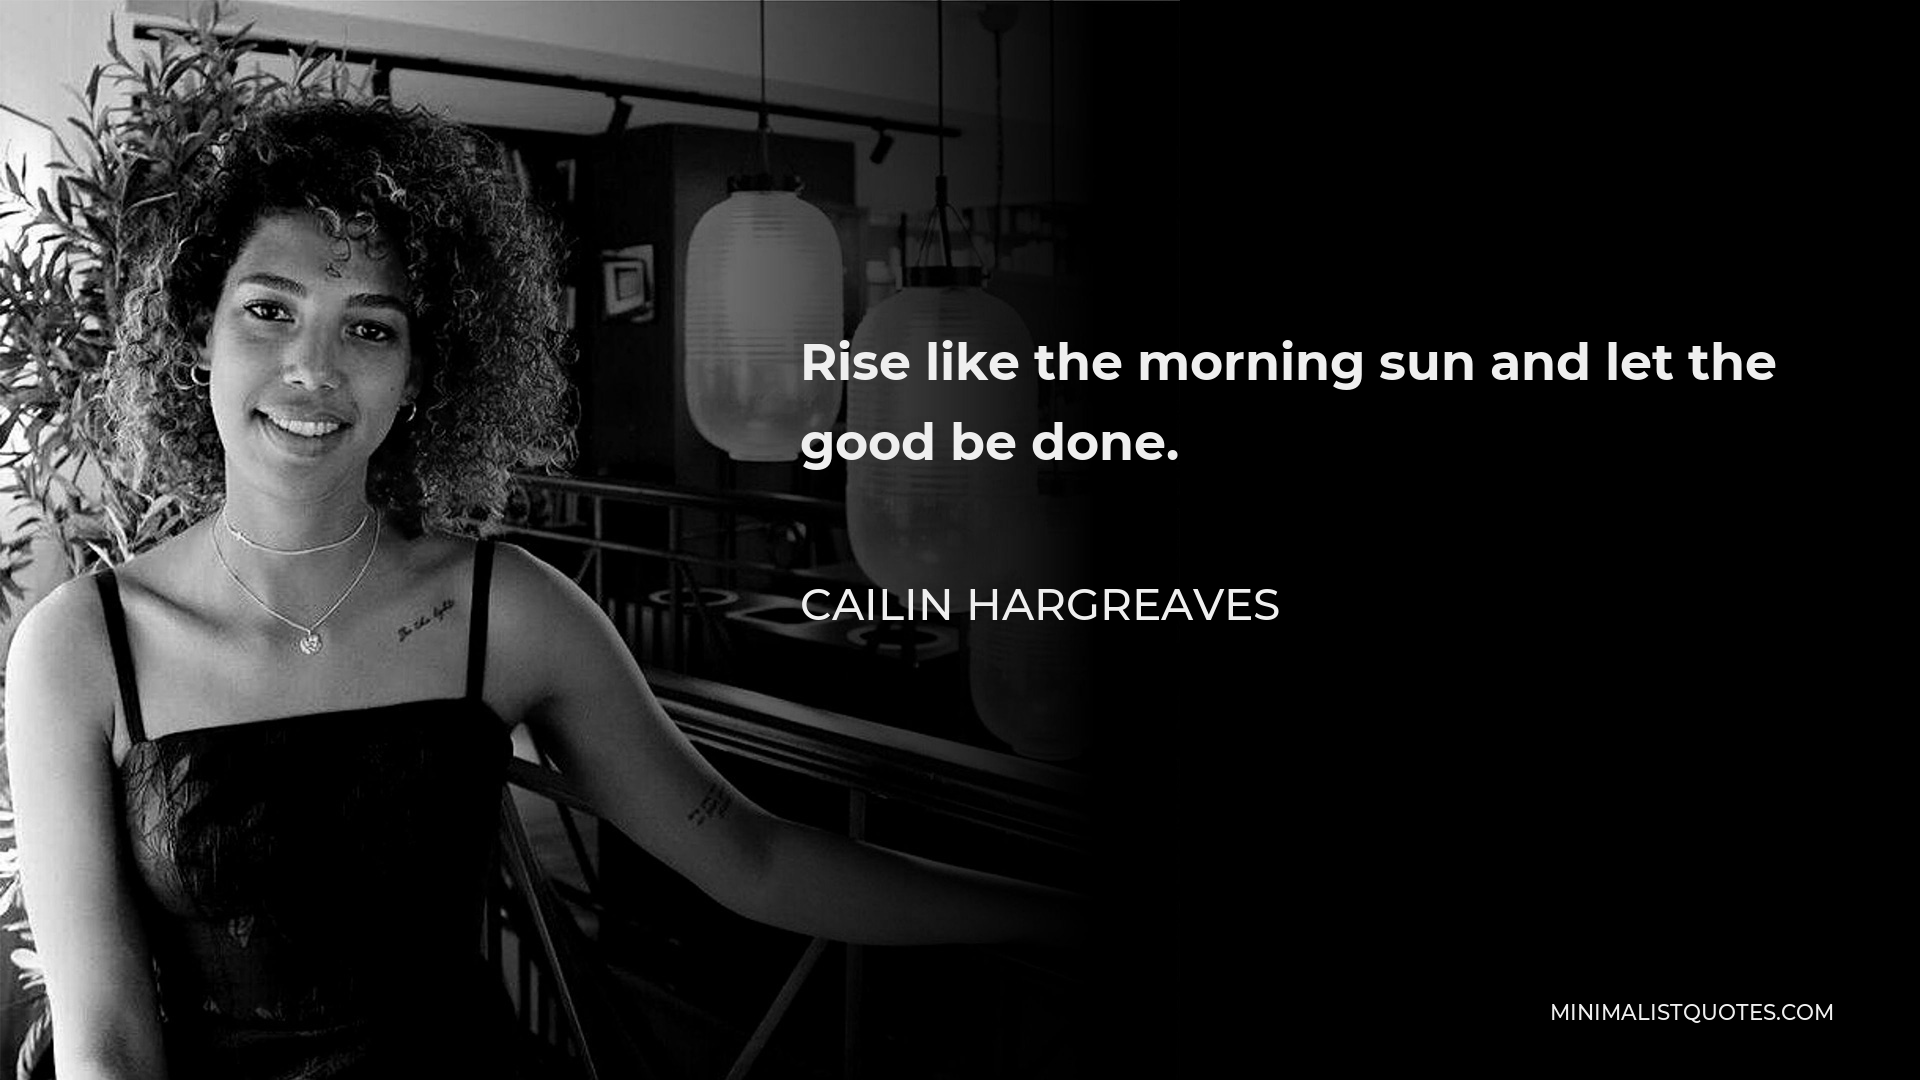 Cailin Hargreaves Quote - Rise like the morning sun and let the good be done.